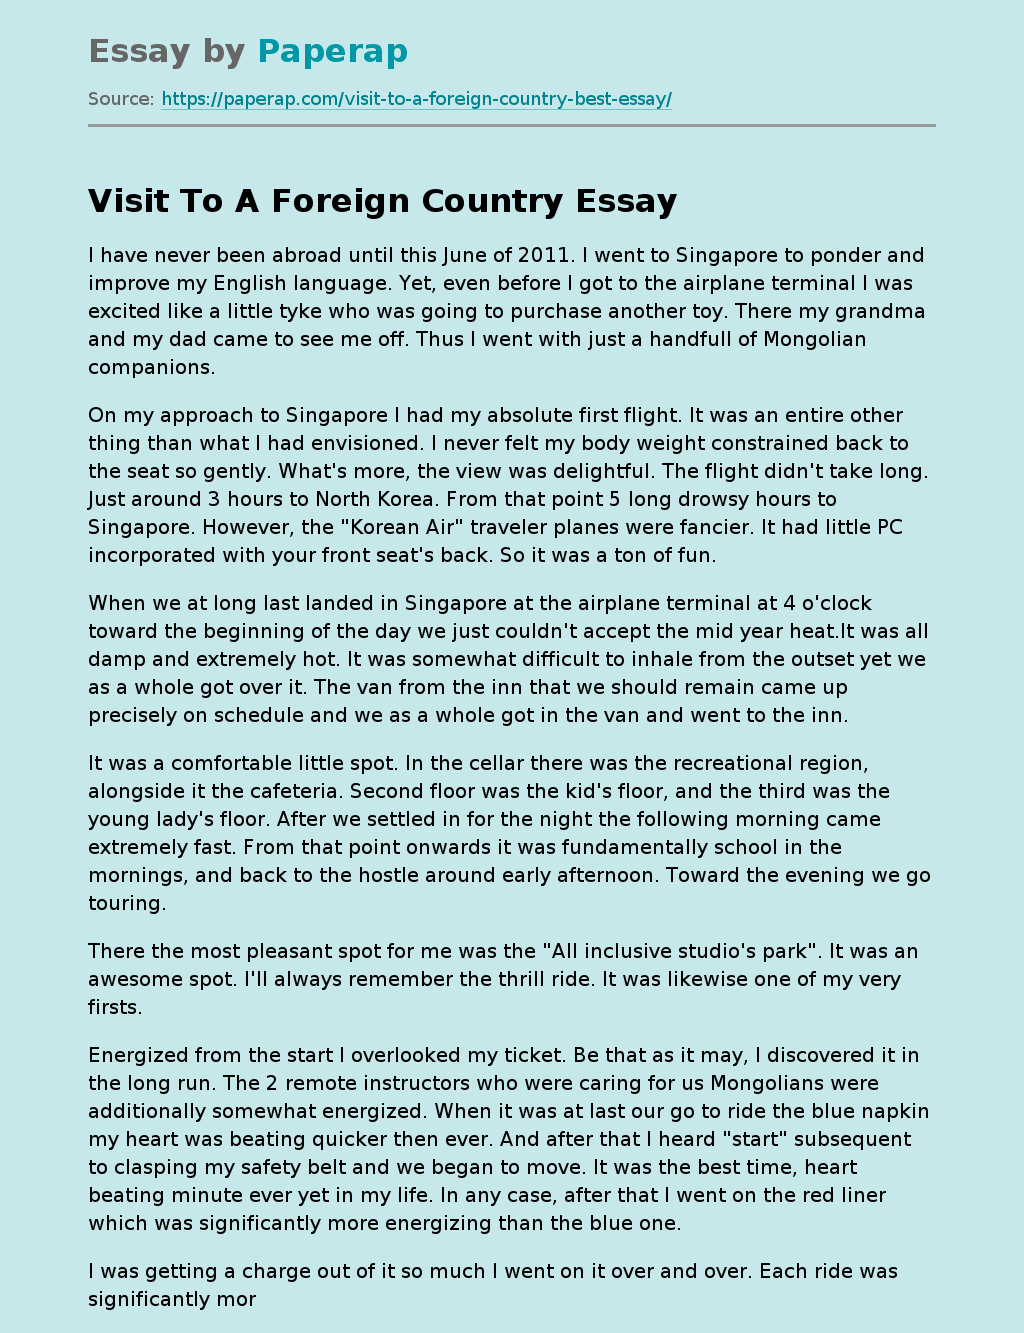 essay about a country you would like to visit